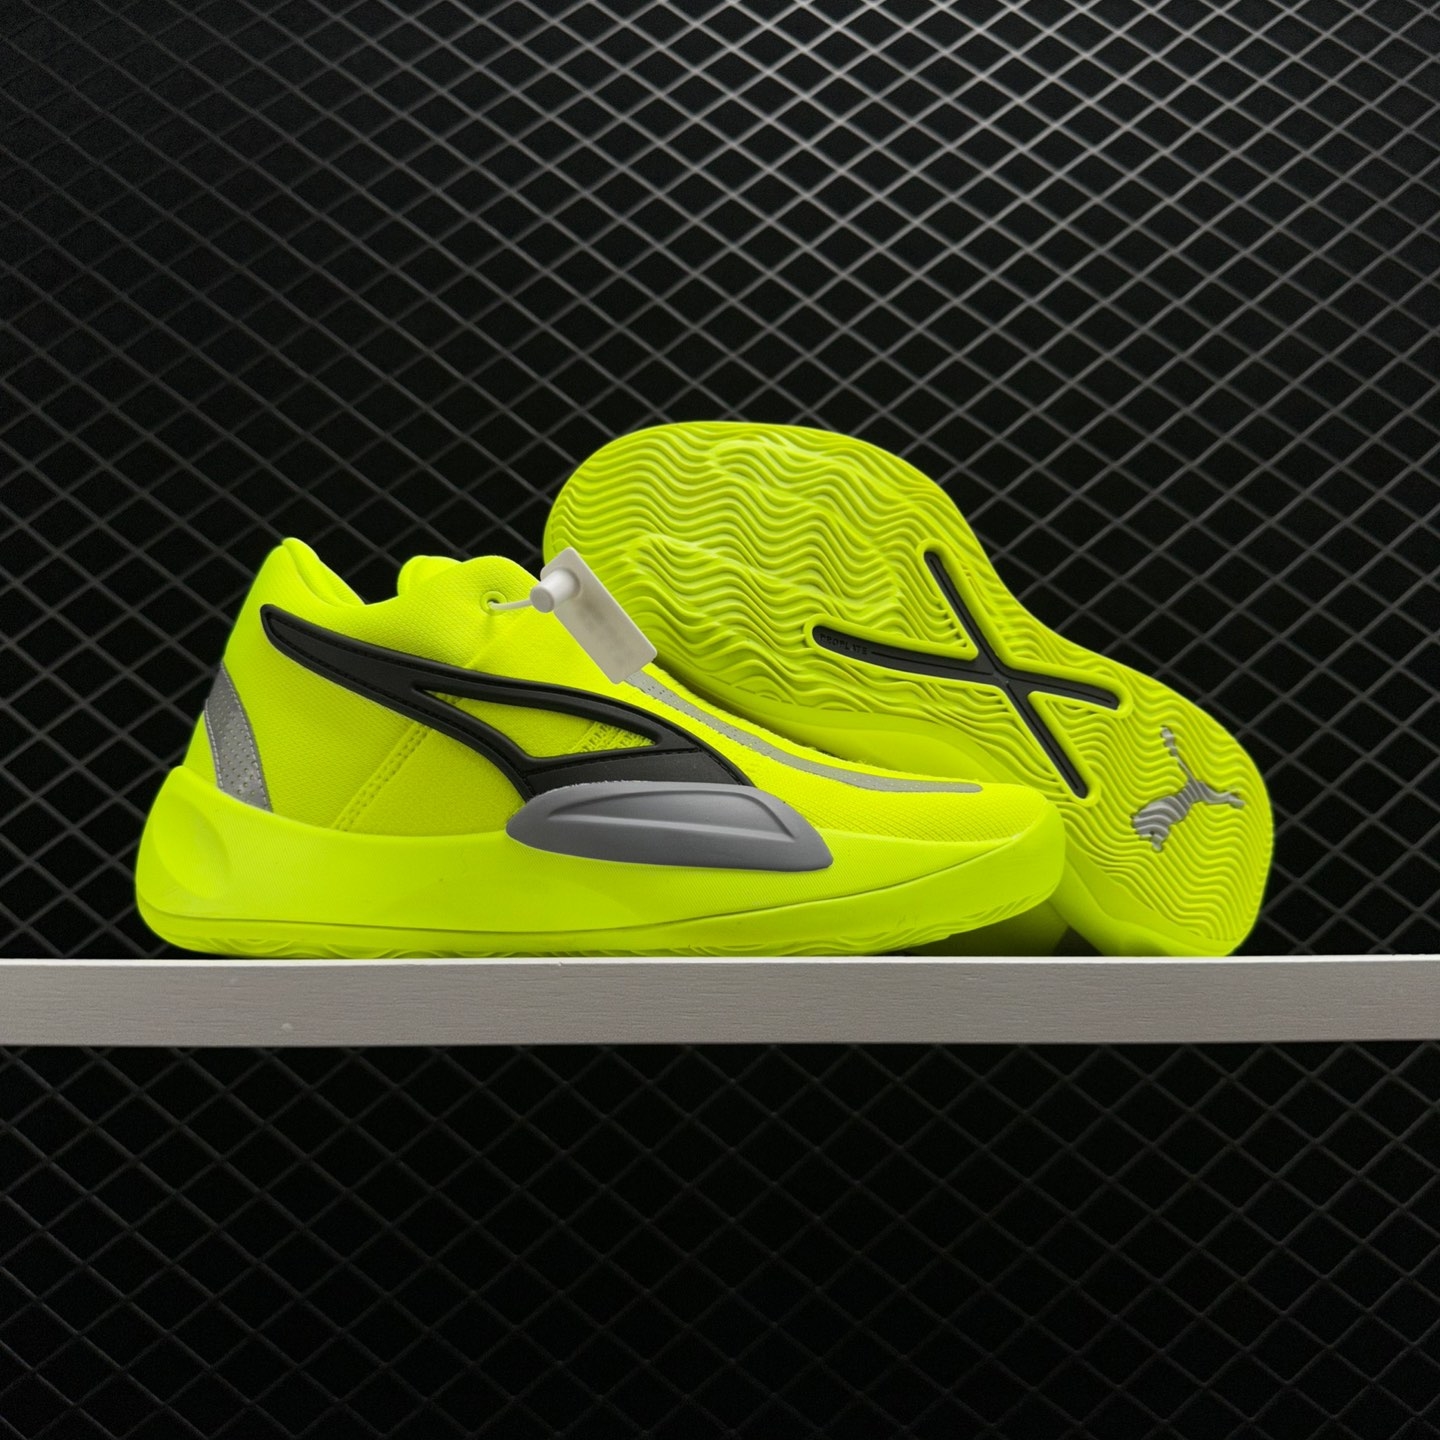 Puma Rise Nitro Lime Squeeze Sneakers 377012 05 - Shop Now!